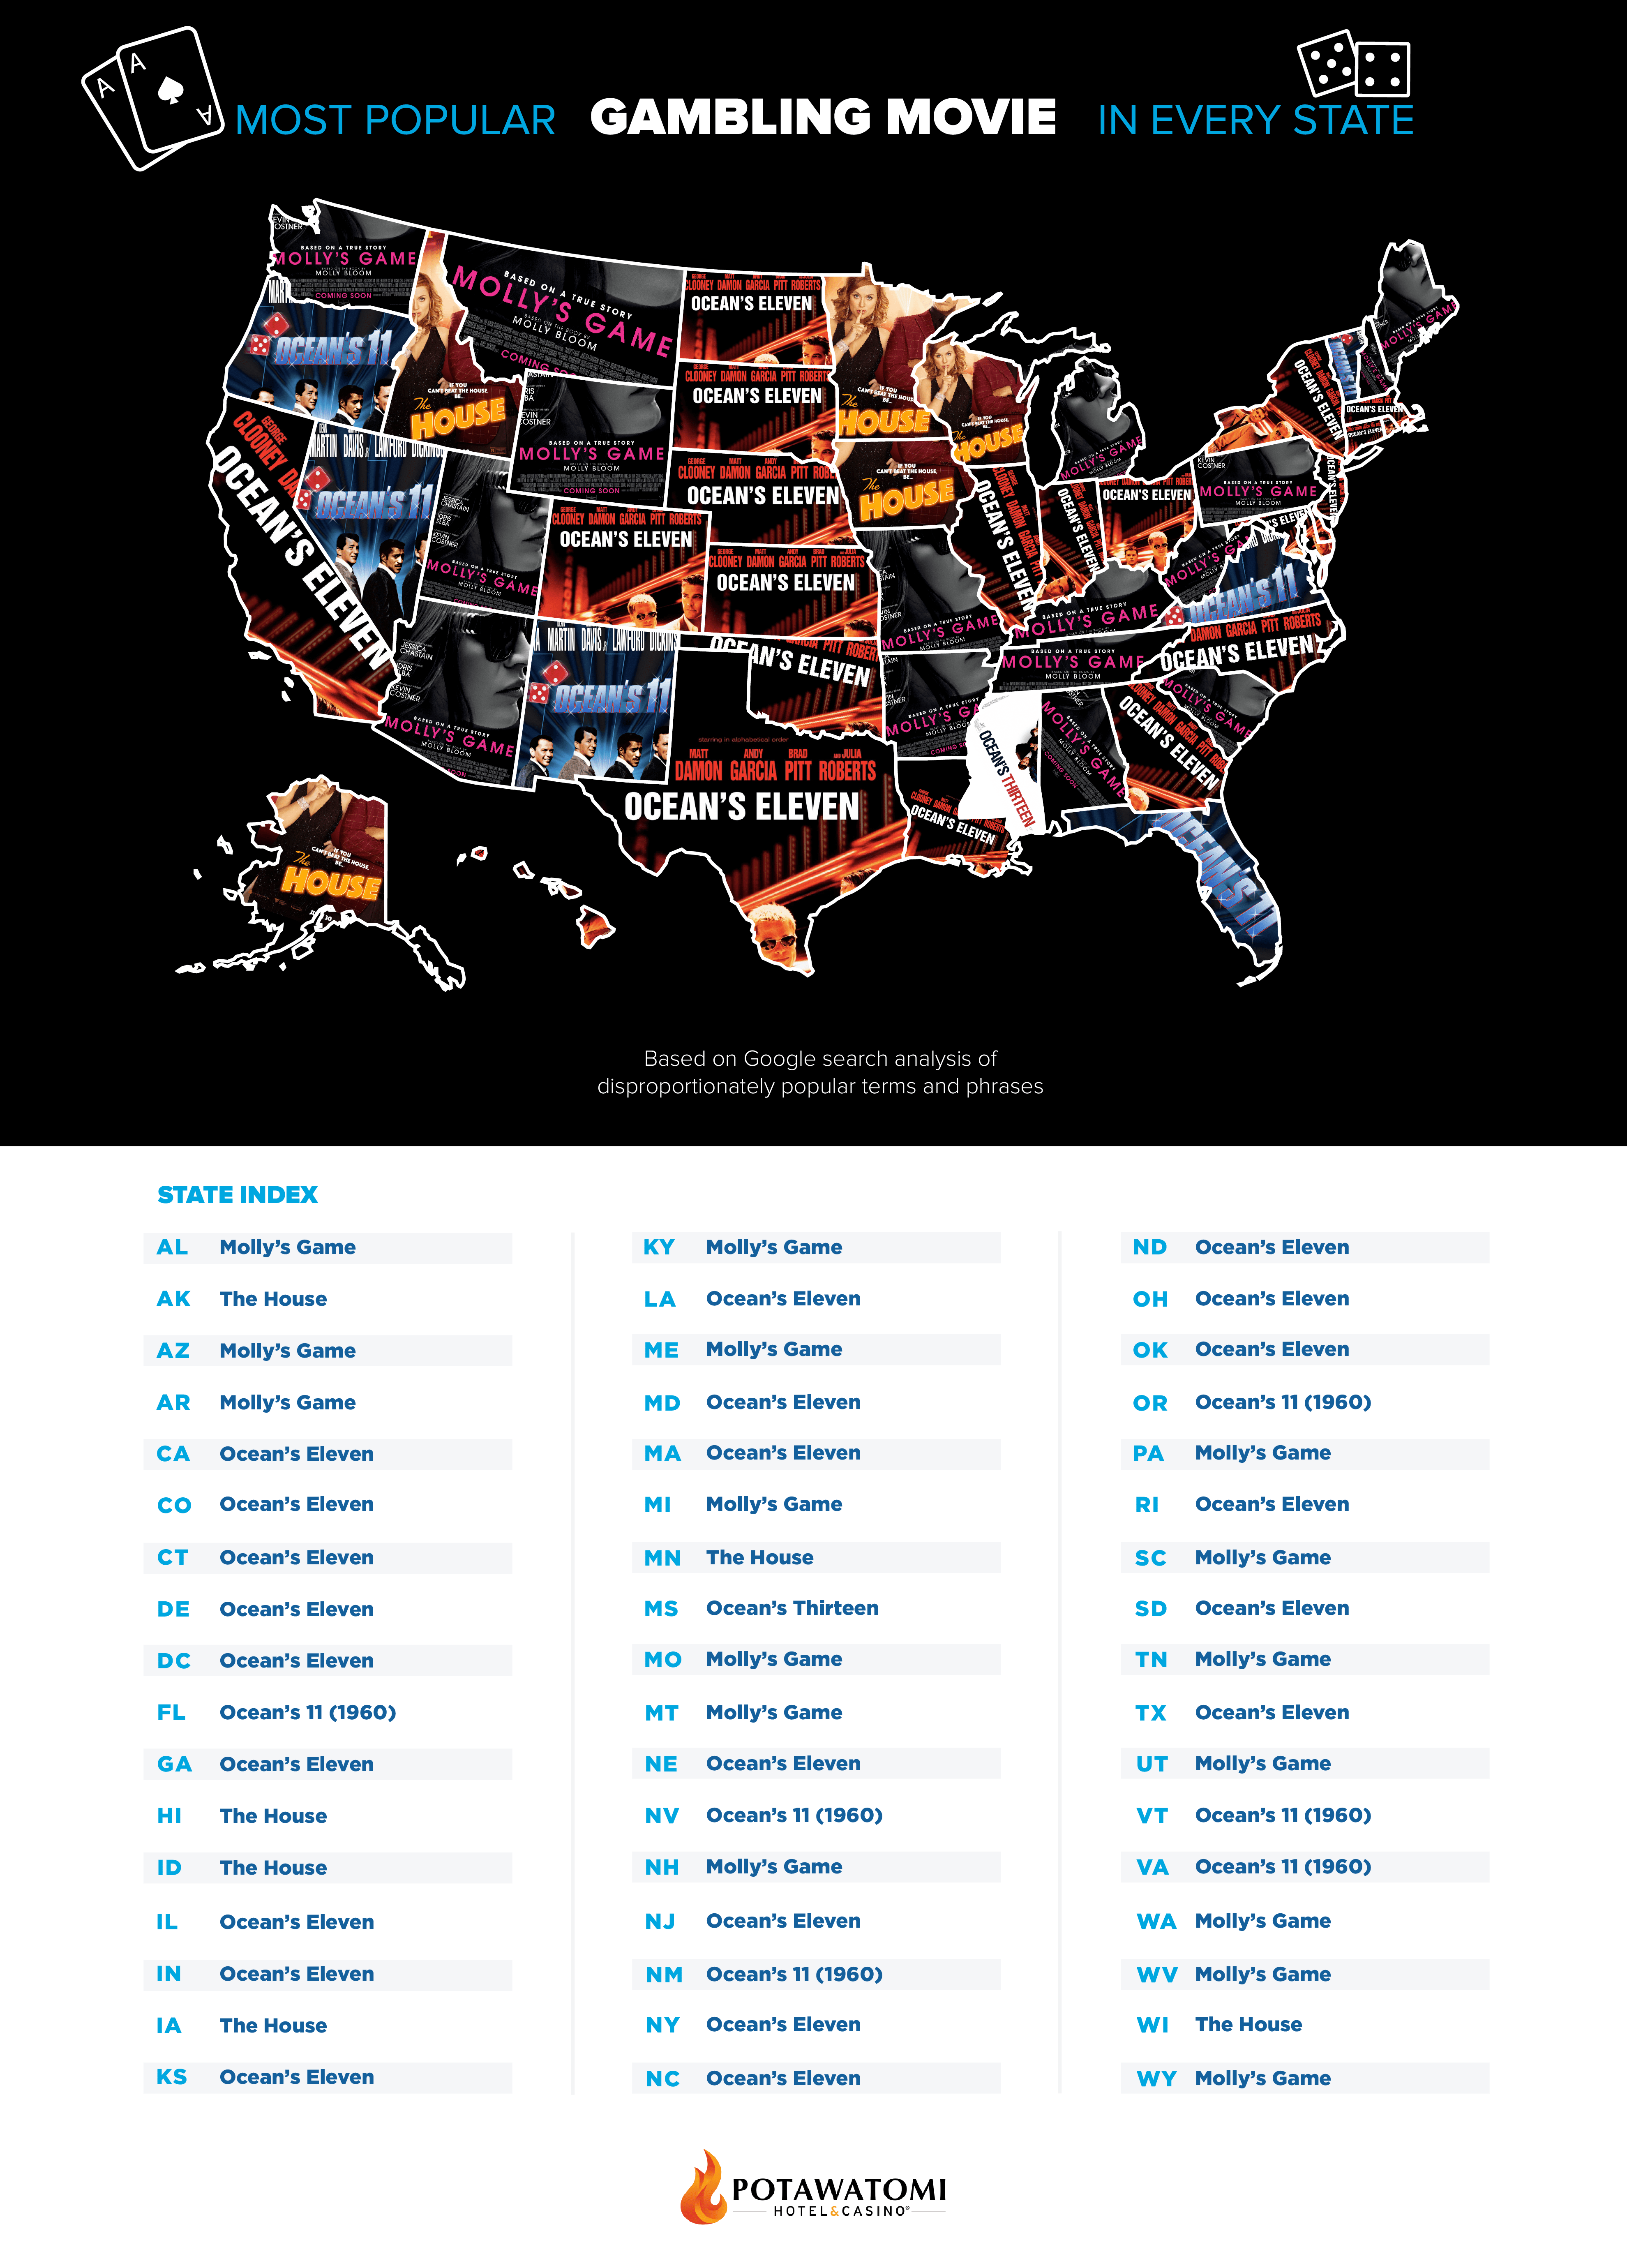 Most Popular Gambling Movie in Every State